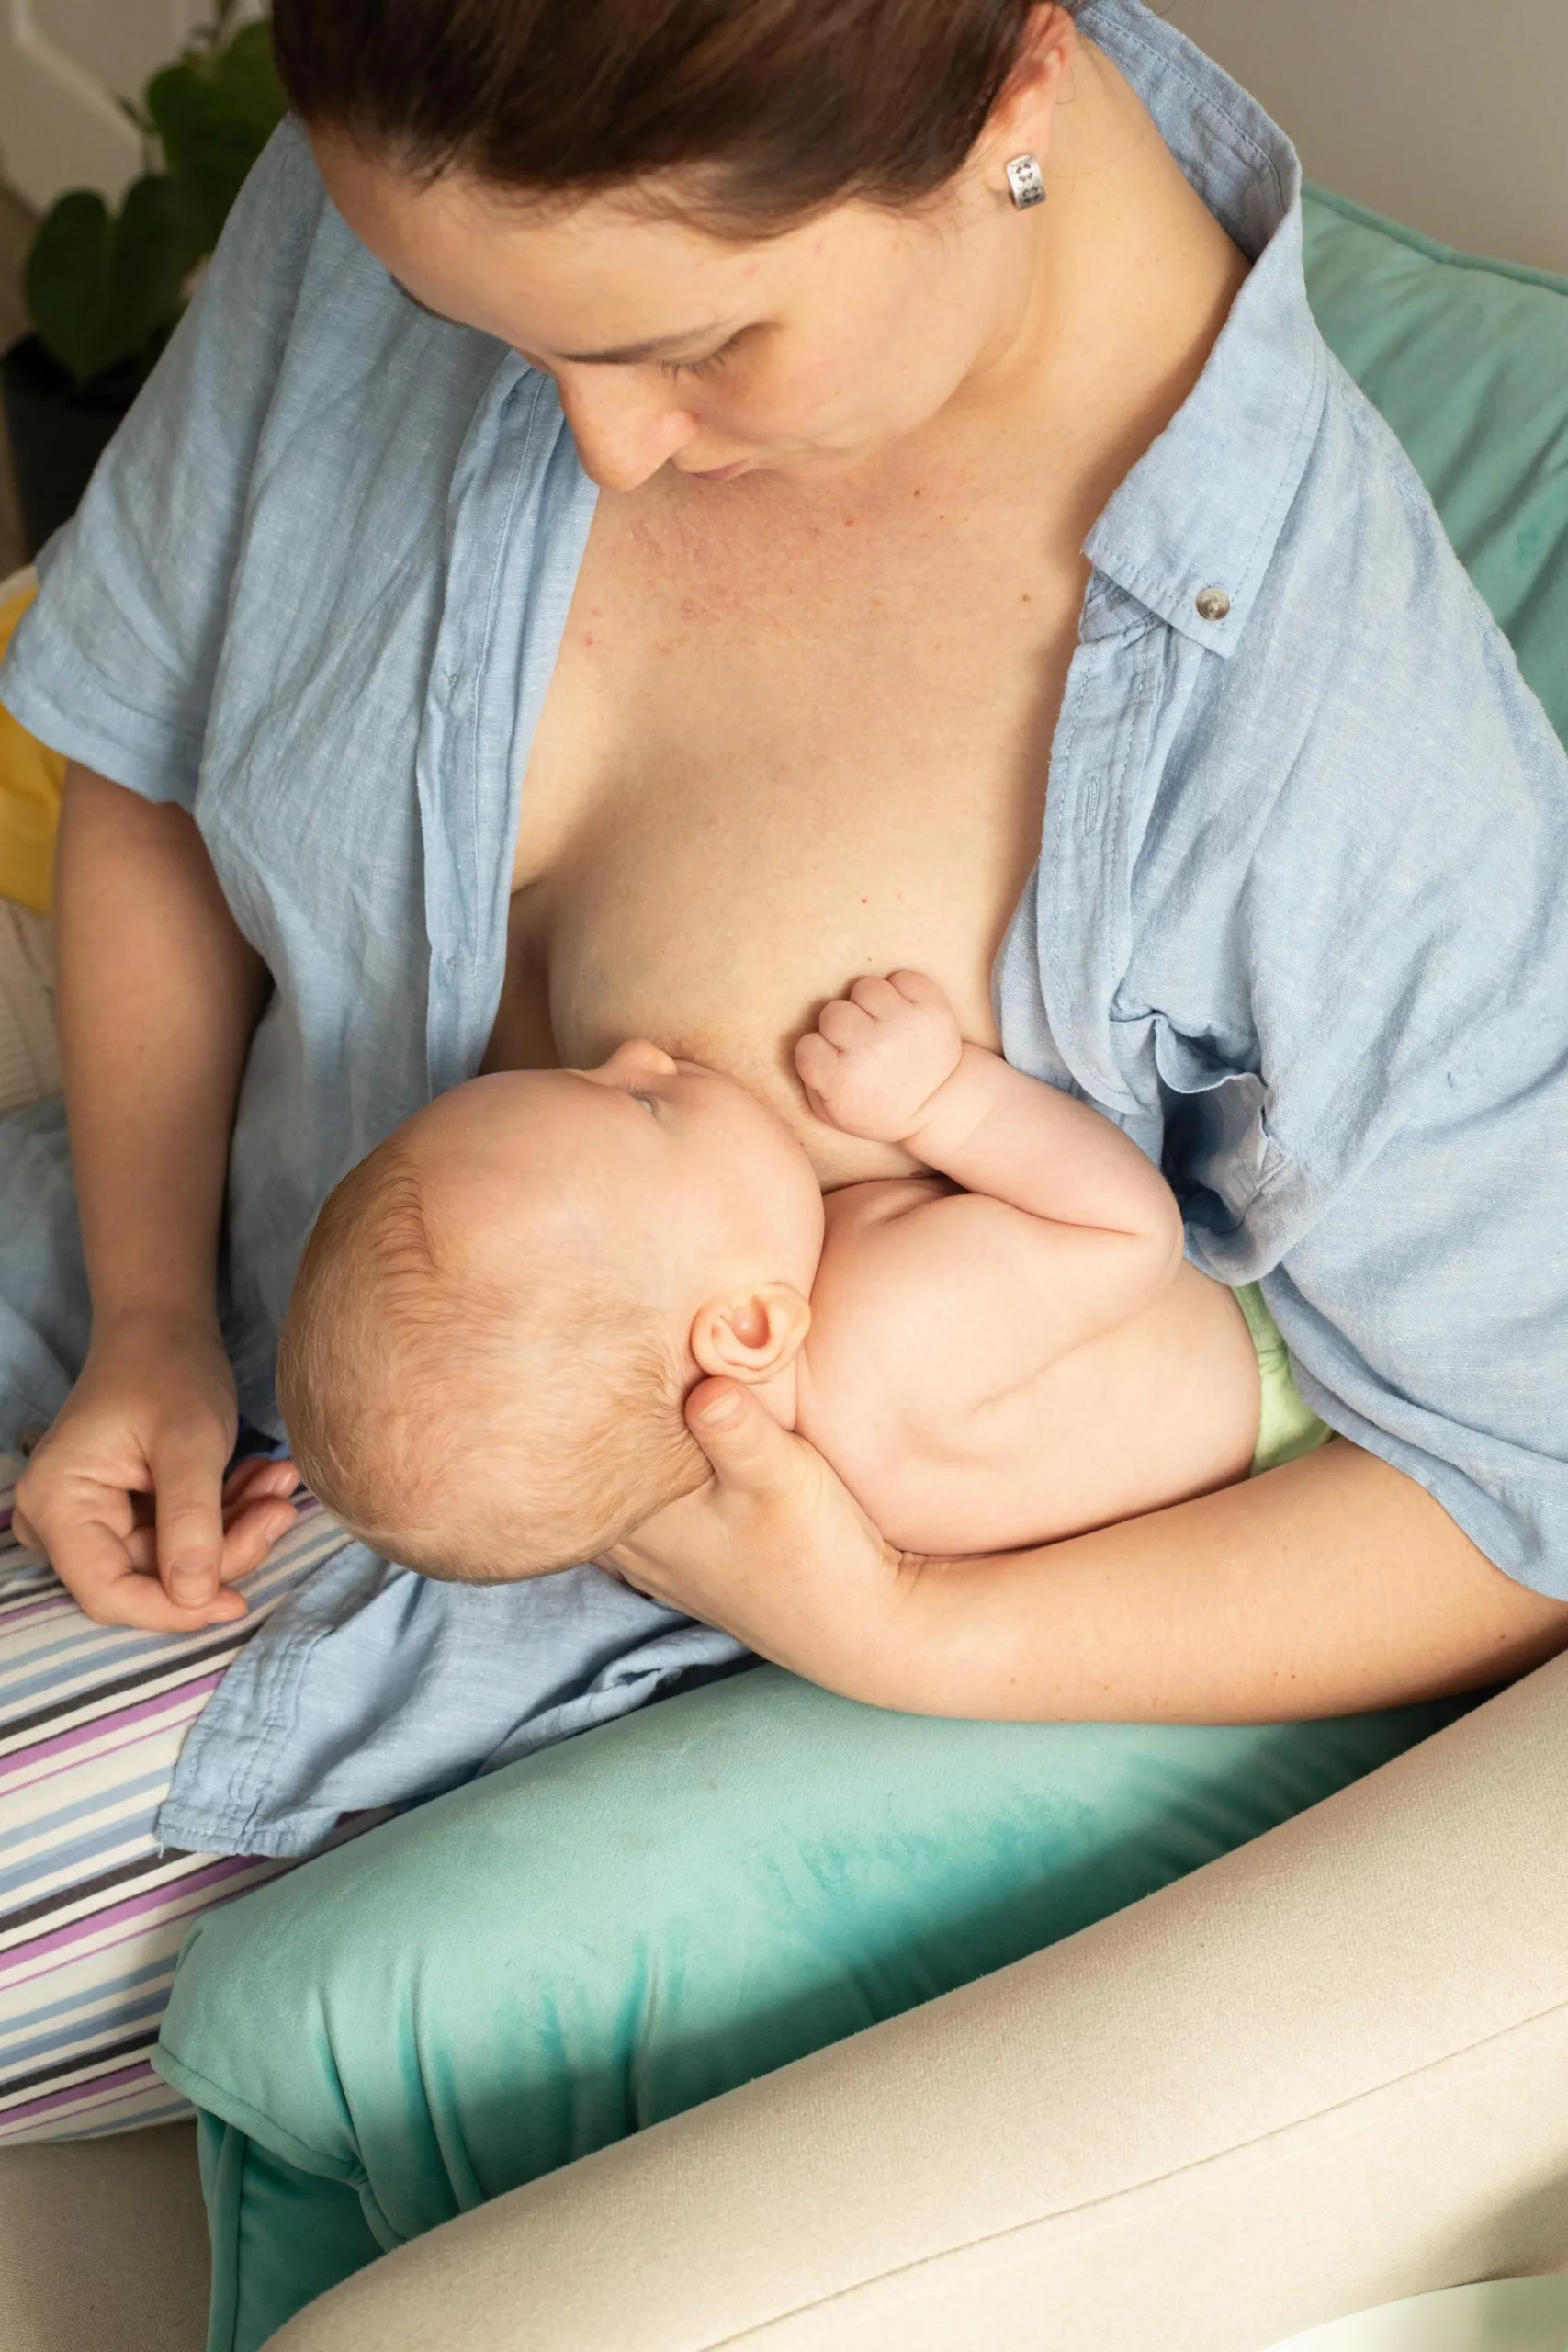 Football hold (Clutch hold/Rugby hold) for breastfeeding